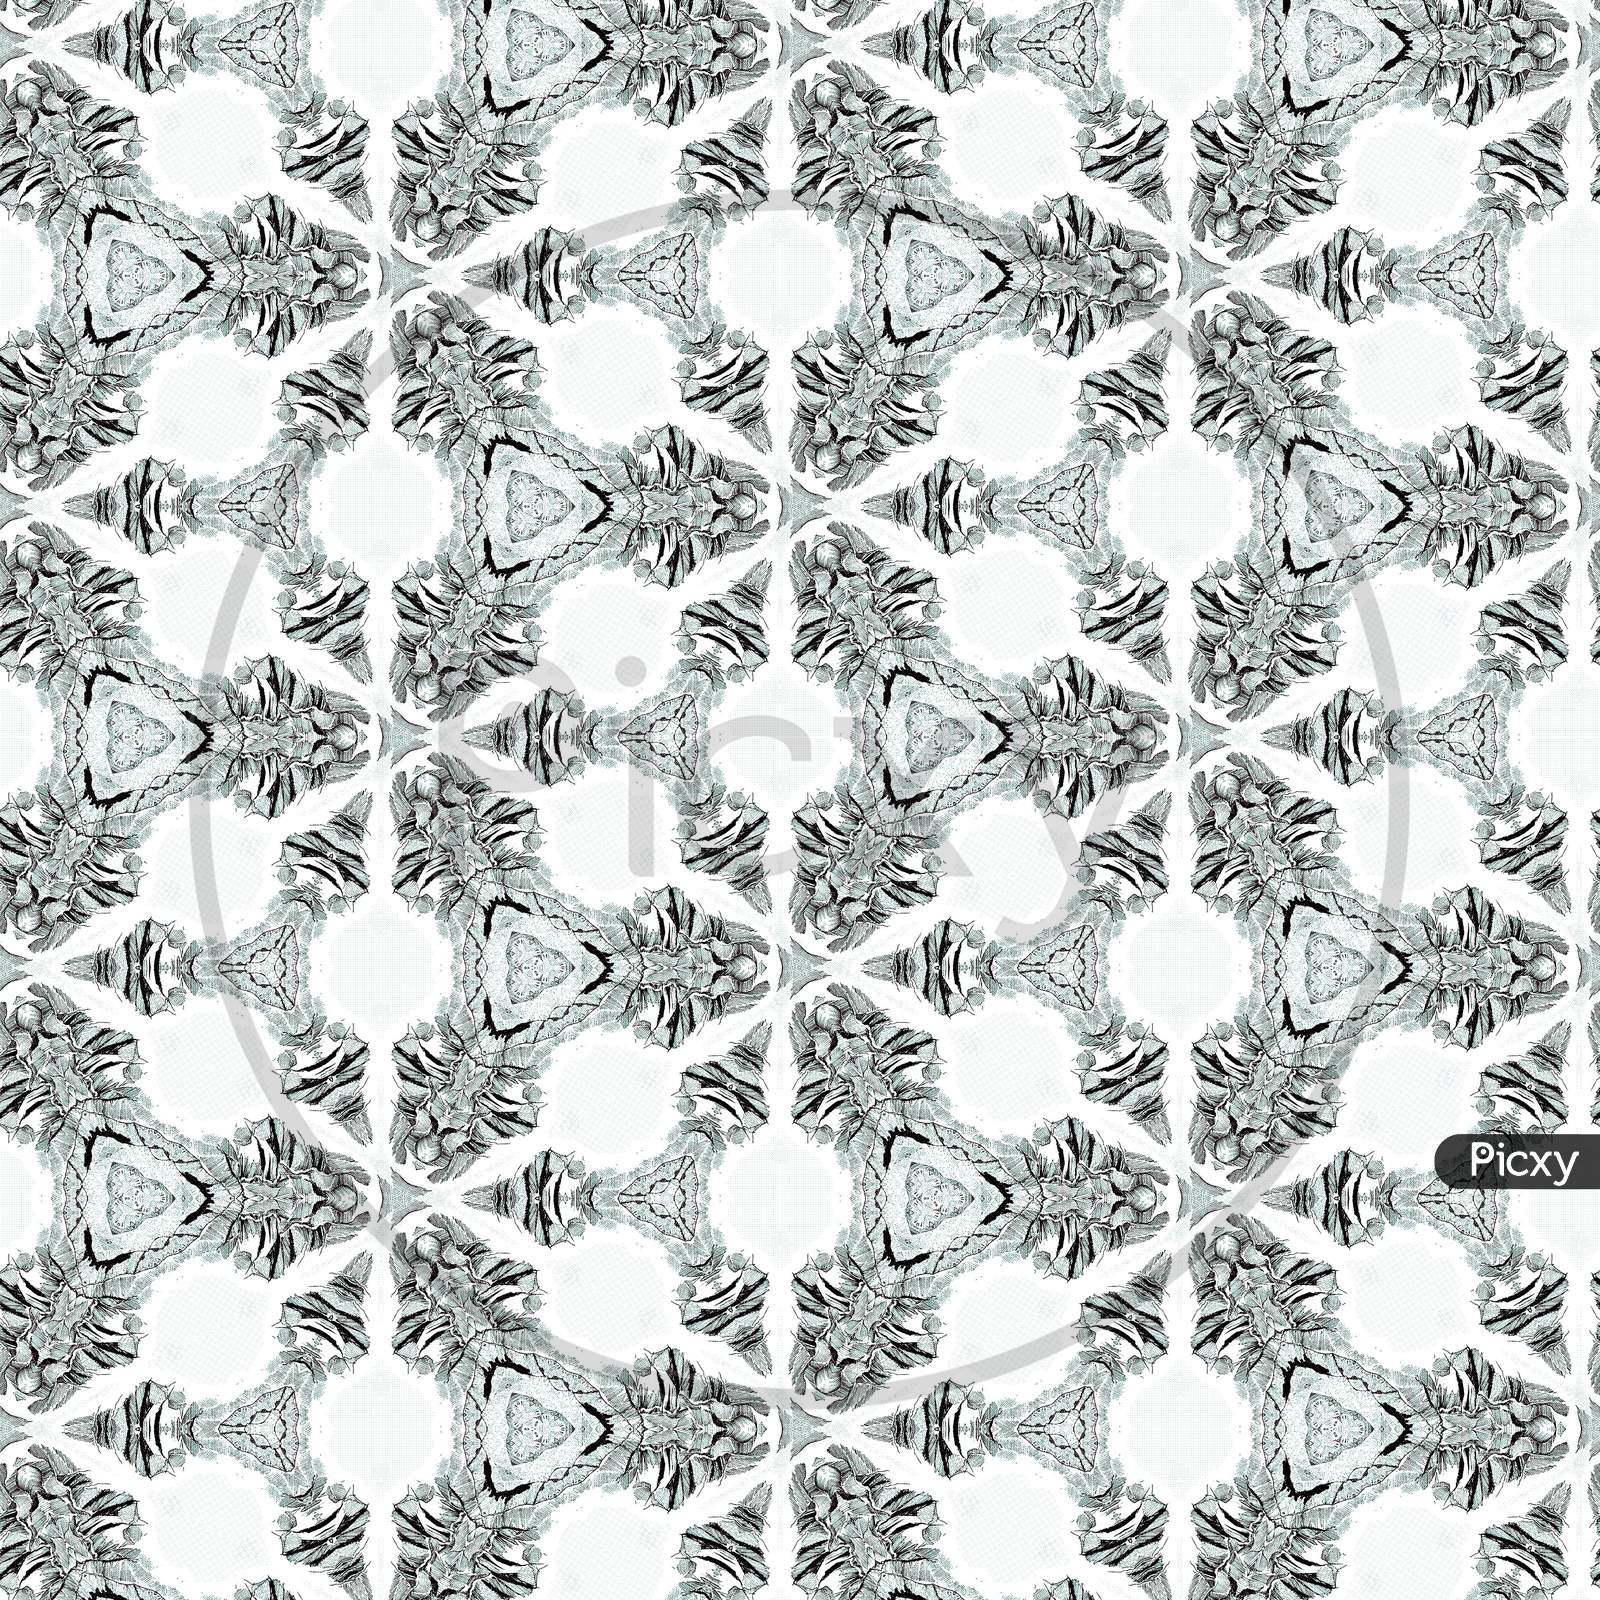 Monochromatic Patterns And Designs On Solid Sheet Of Wallpaper. Concept Of Home Decor And Interior Designing